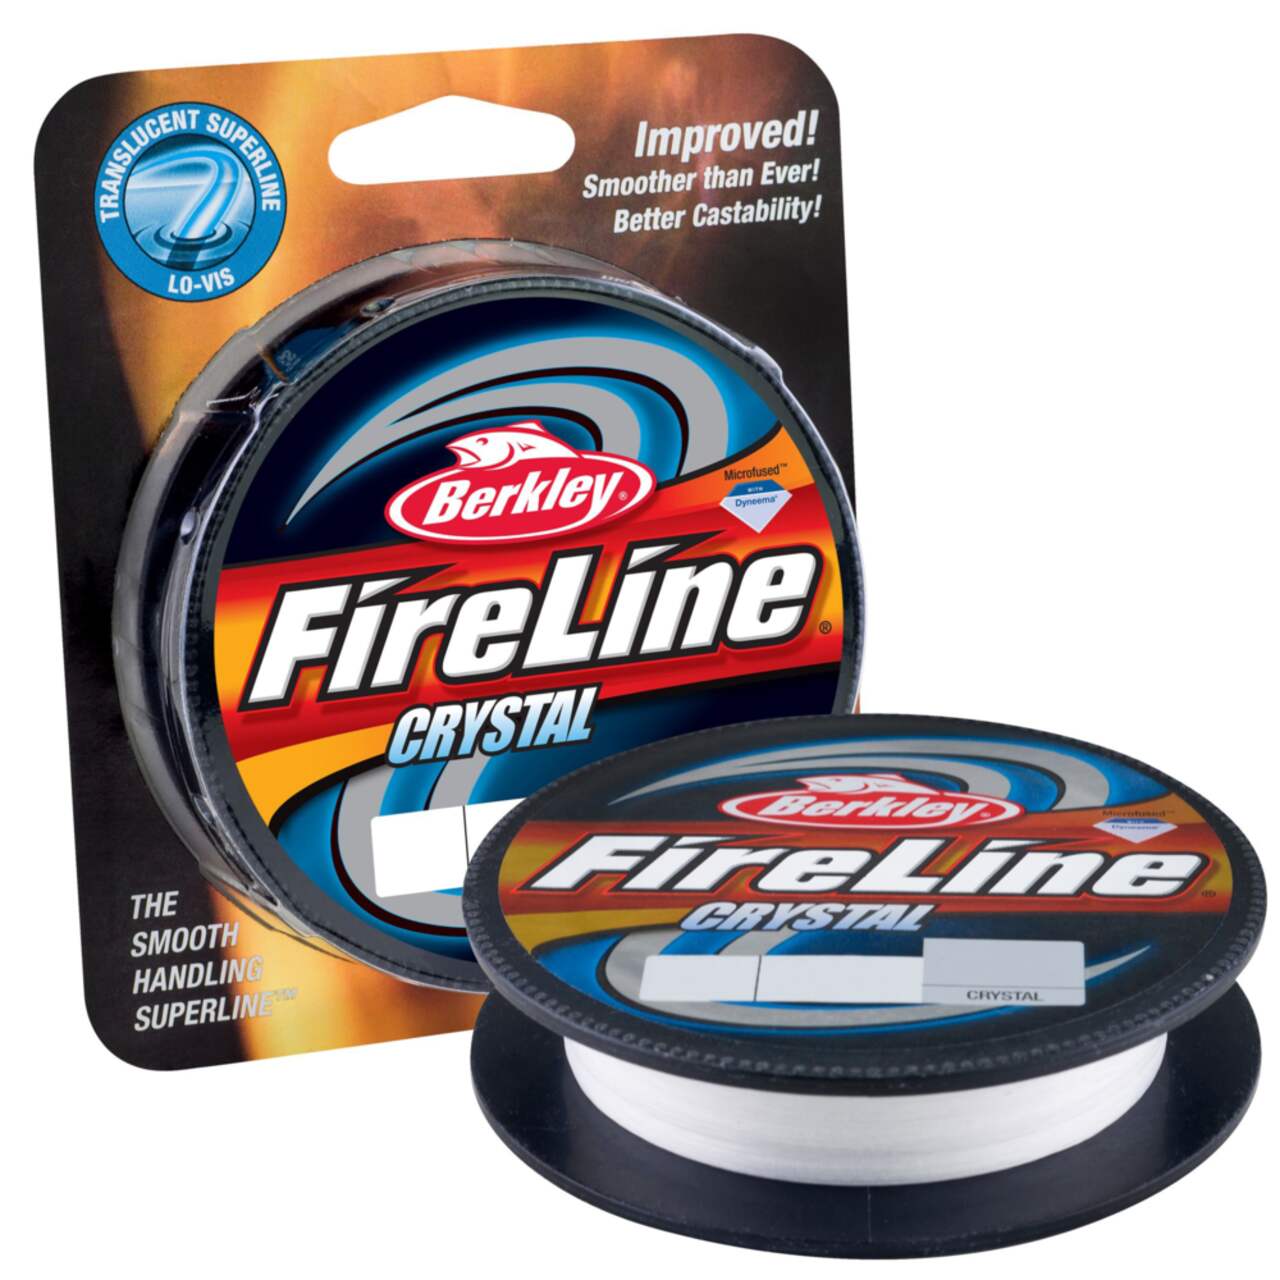 https://media-www.canadiantire.ca/product/playing/fishing/fishing-accessories/0771182/berkley-fireline-fused-crystal-20lb-125-yards-623a673b-177c-4a94-b733-d8946eaeac77.png?imdensity=1&imwidth=1244&impolicy=mZoom